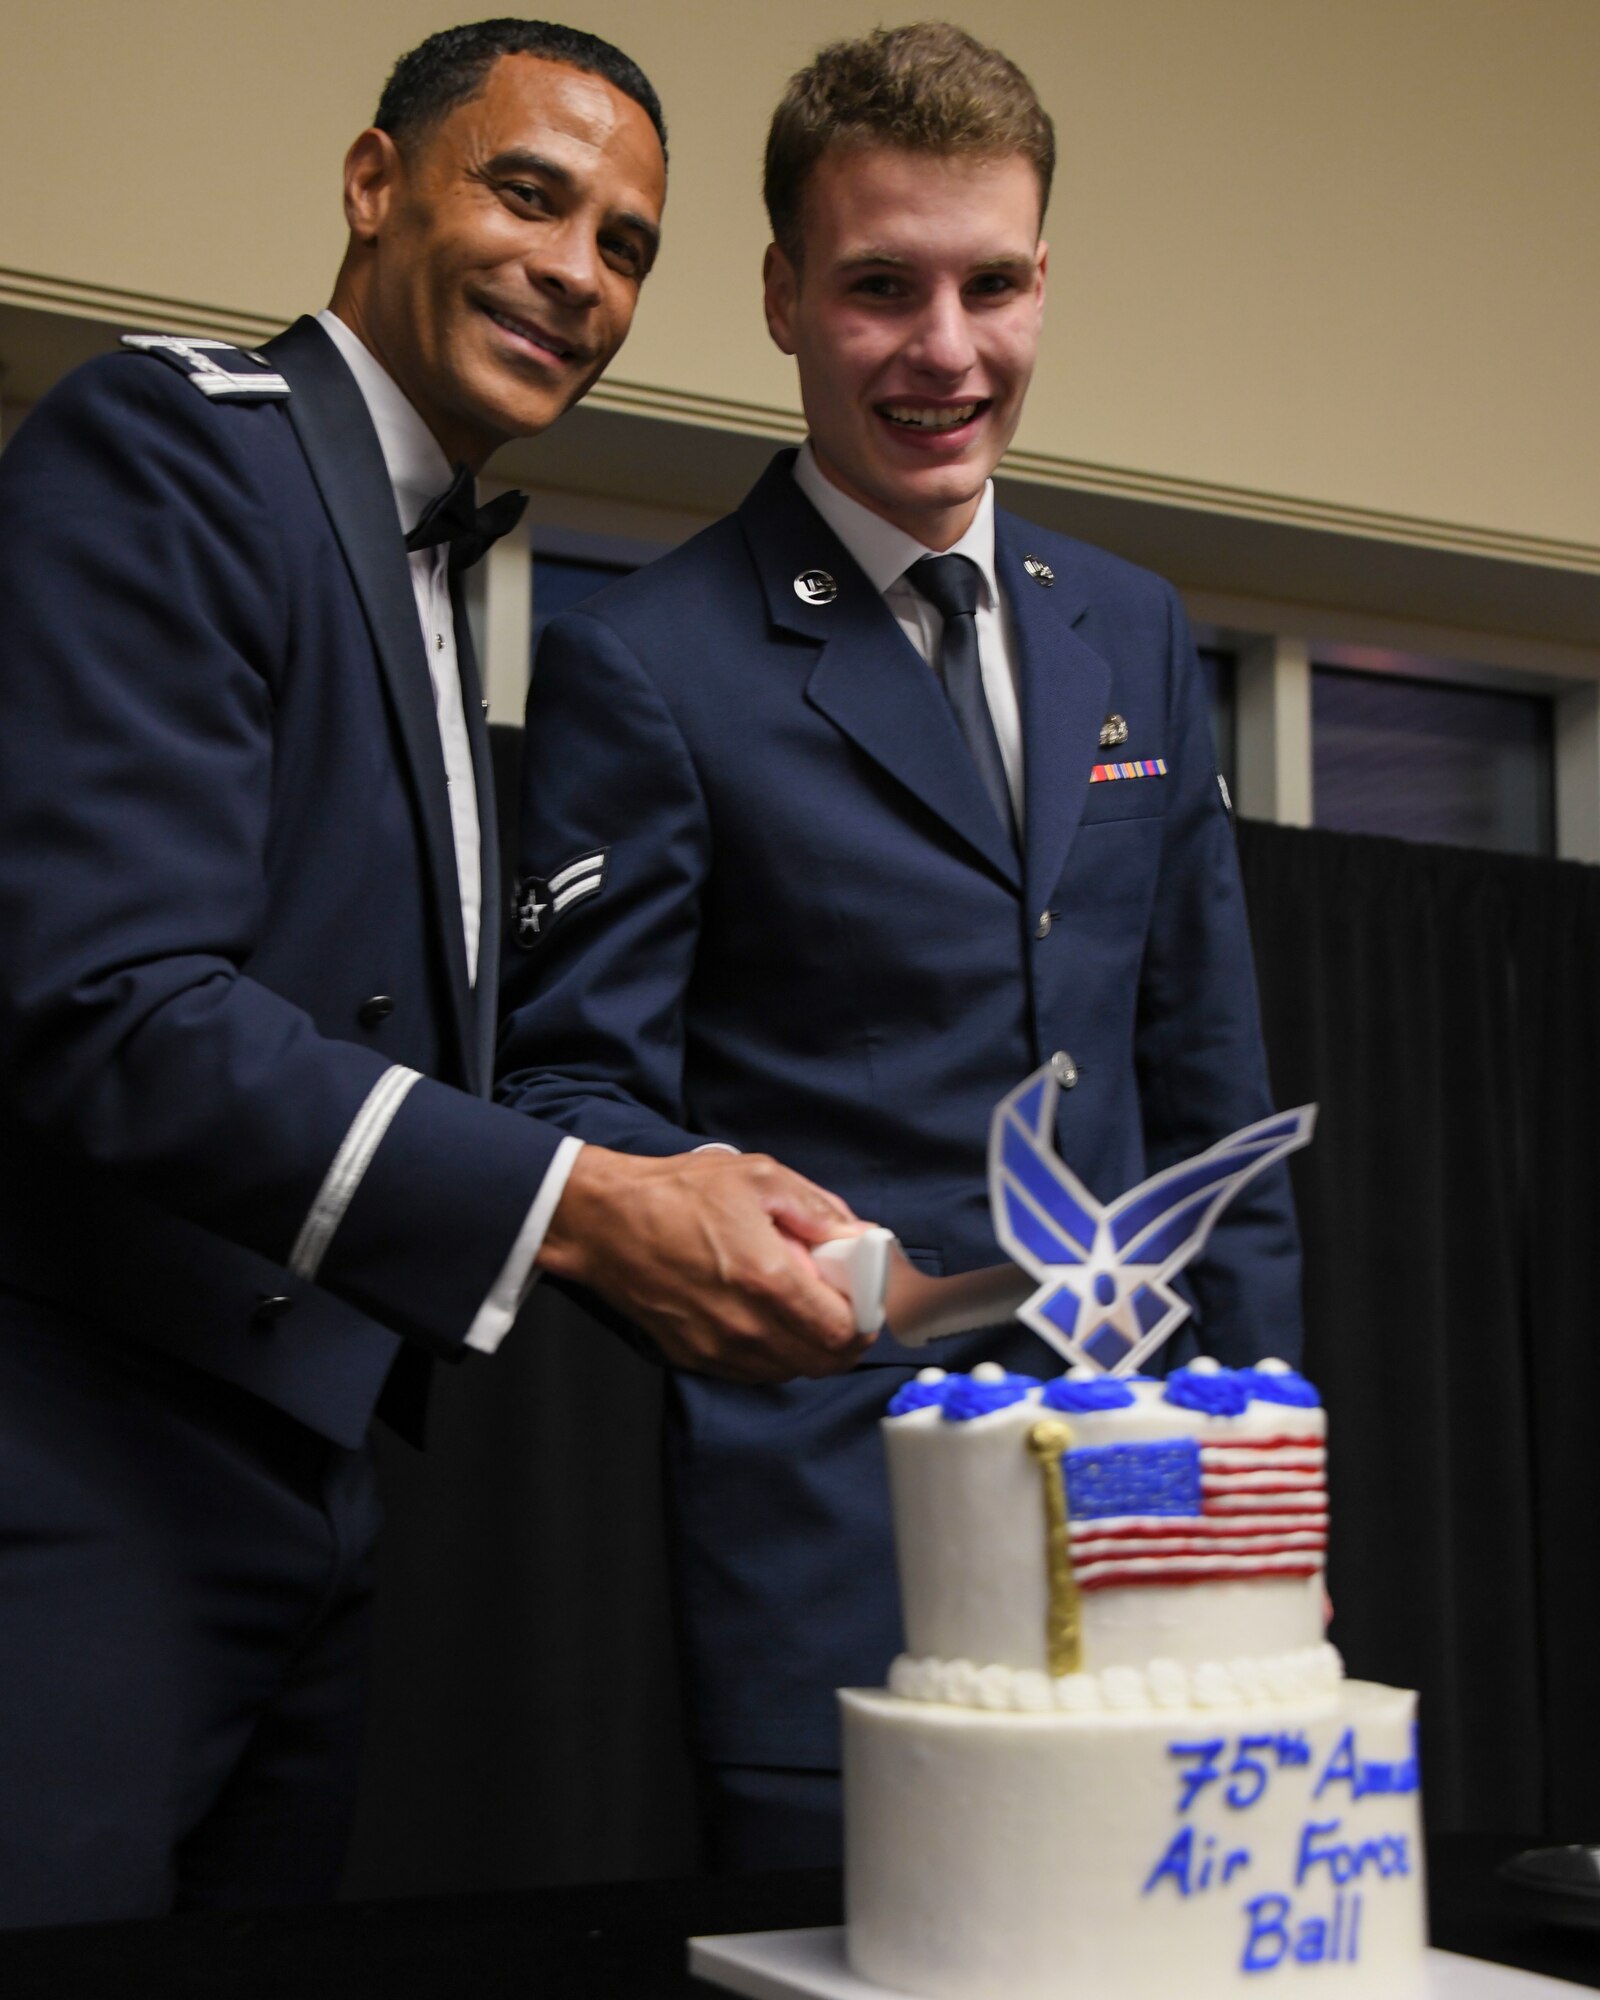 U.S. Air Force Col. Timothy Curry, 319th Reconnaissance Wing commander, and U.S. Air Force Airmen 1st Class Cable Spicklemire, 319th Force Support Squadron relocation technician, cut a cake Sept. 16, 2022, during the 319th RW’s celebration of the Air Force’s 75th birthday at the Ralph Englestad Arena in Grand Forks, North Dakota. The theme for the ball called airmen to “Innovate, Accelerate and Thrive,” to celebrate what the Air Force was able to accomplish over the past 75 years of service and to look forward to a bright future. (U.S. Air Force photo by Senior Airman Roxanne A. Belovarac)